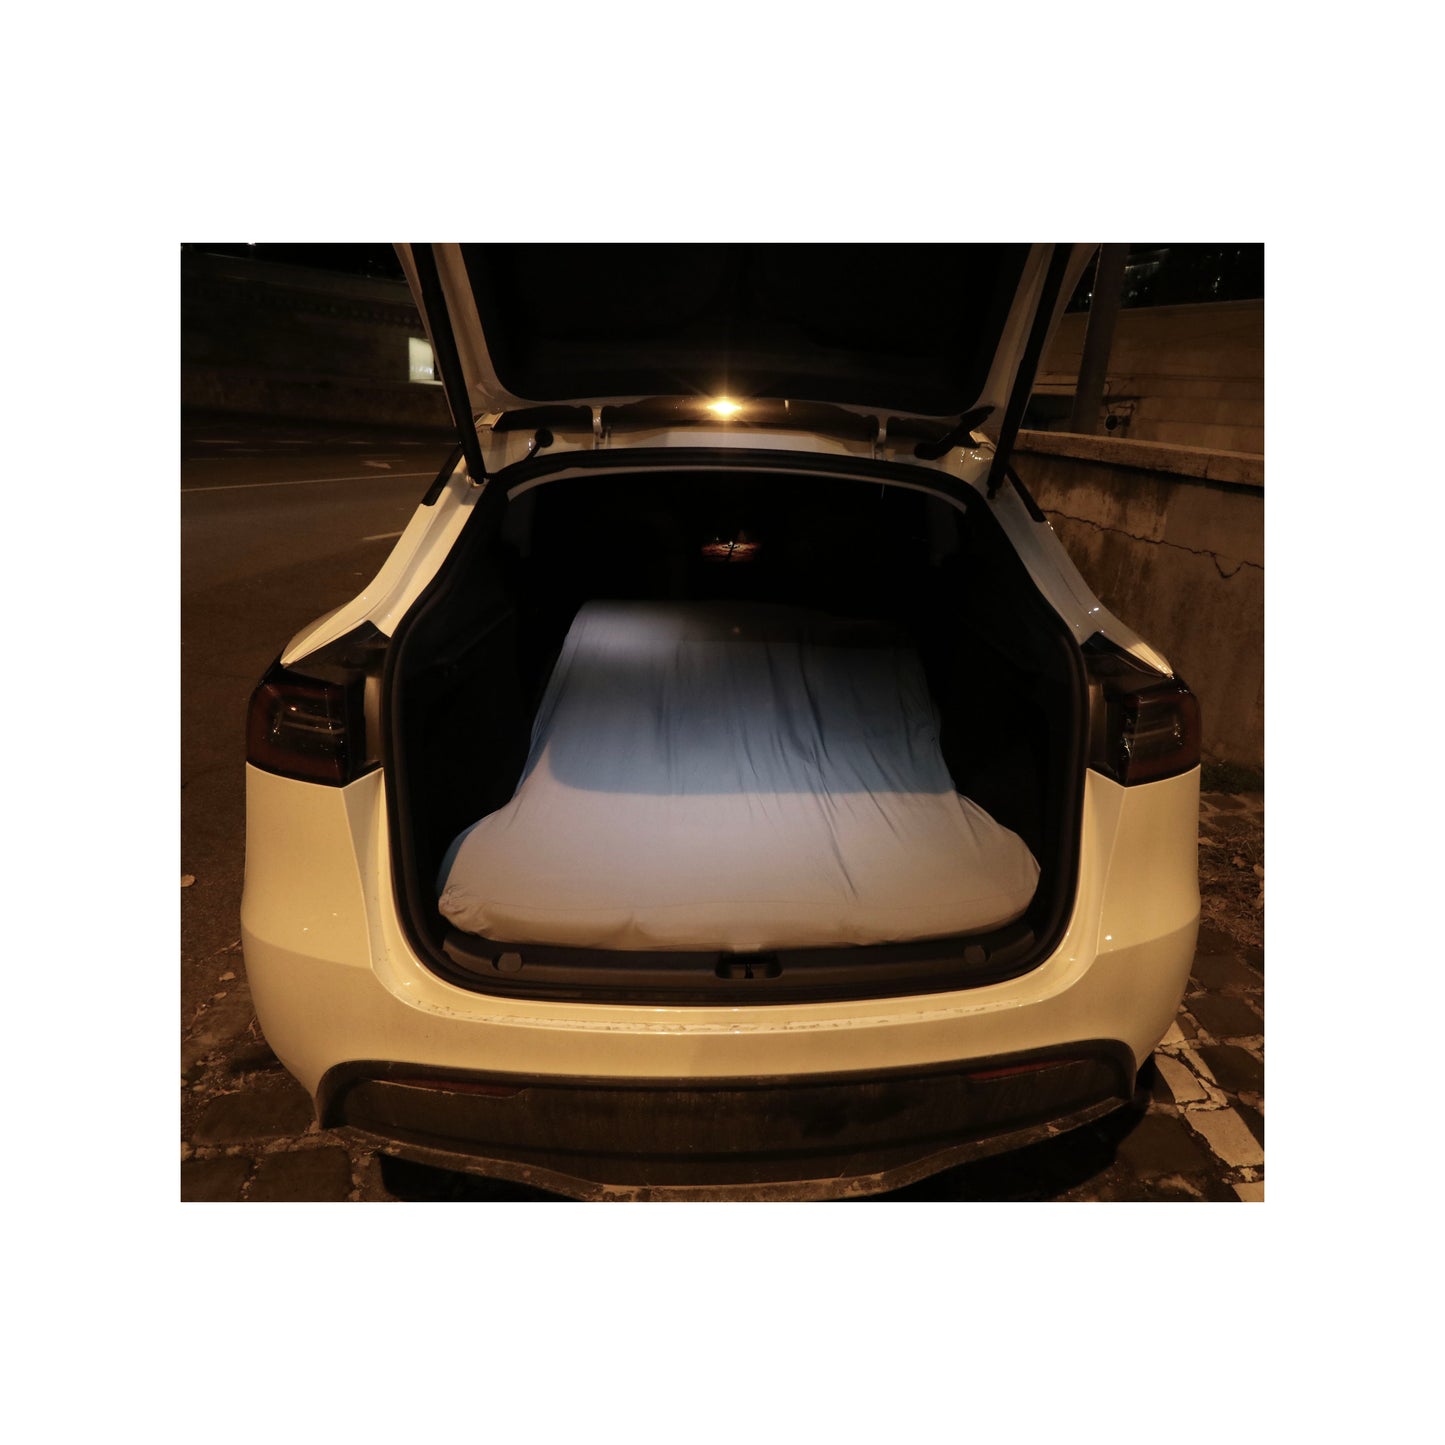 EV-MATS Basic CAMP SET for Tesla Model Y includes the Tesla mattress, the waterproof bag that fits in the back trunk of the Tesla Model Y, a sheet, a quilt, 2 pillows and a pillowcase